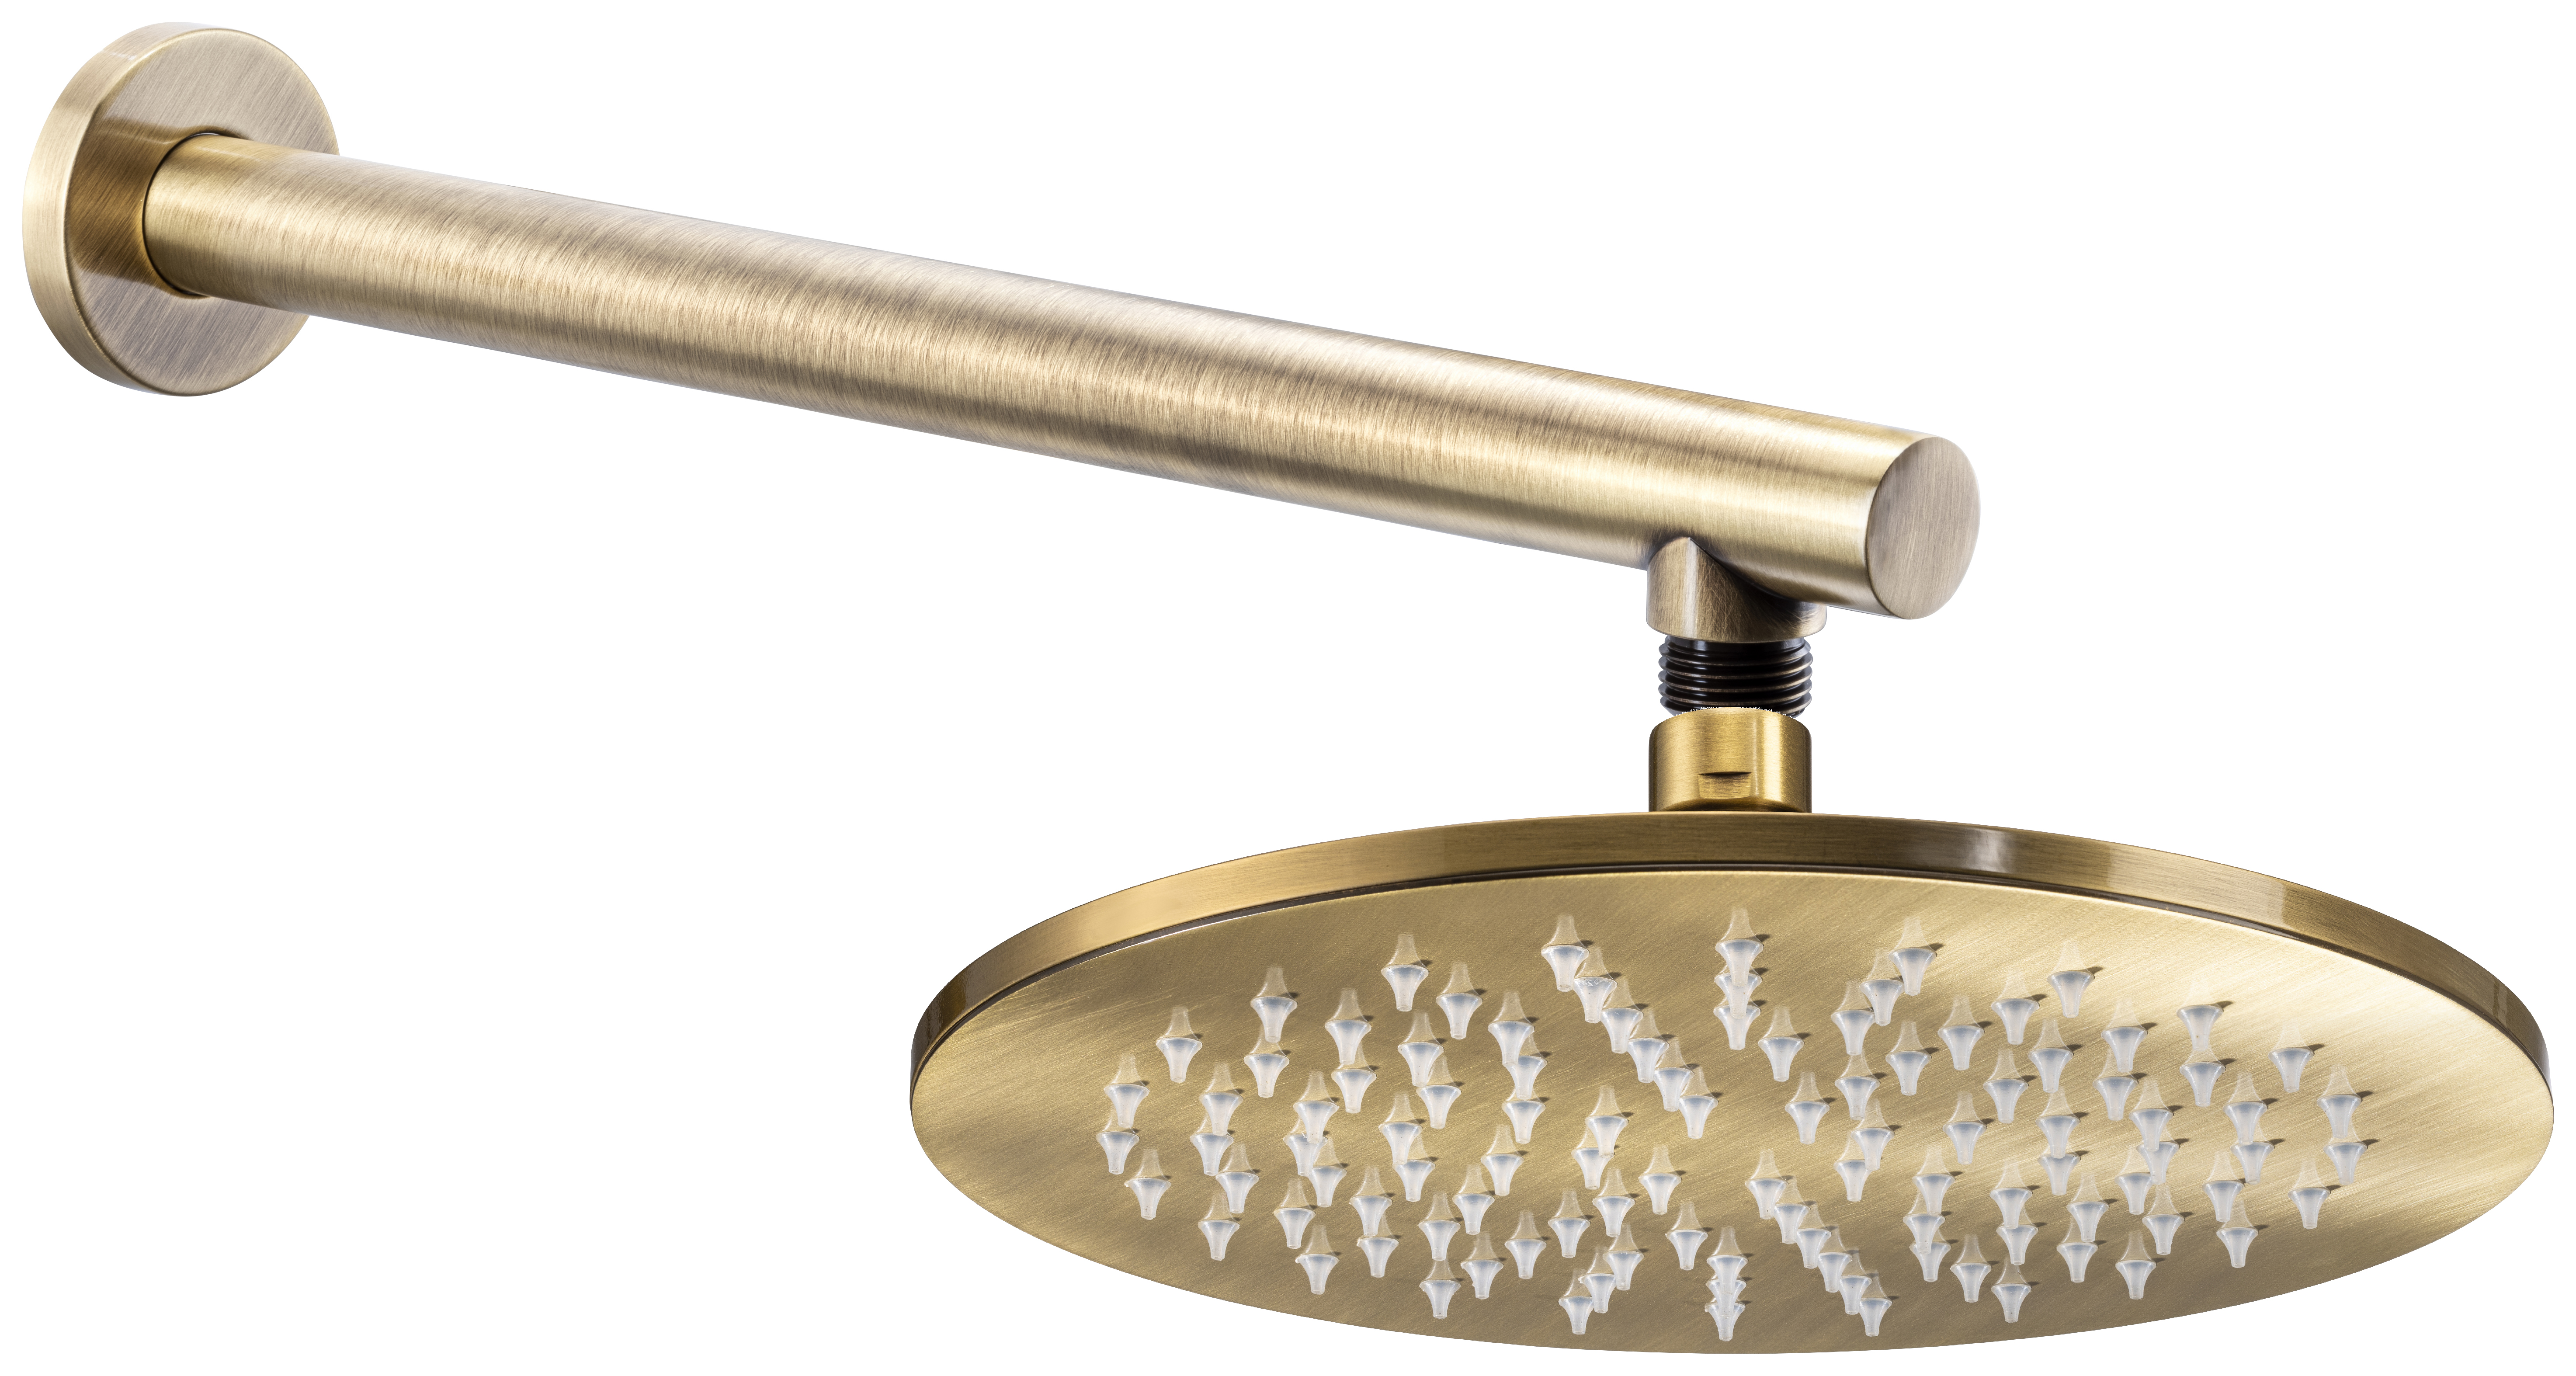 Abode Storm Antique Brass Wall Mounted Round Shower Head & Arm - 225mm